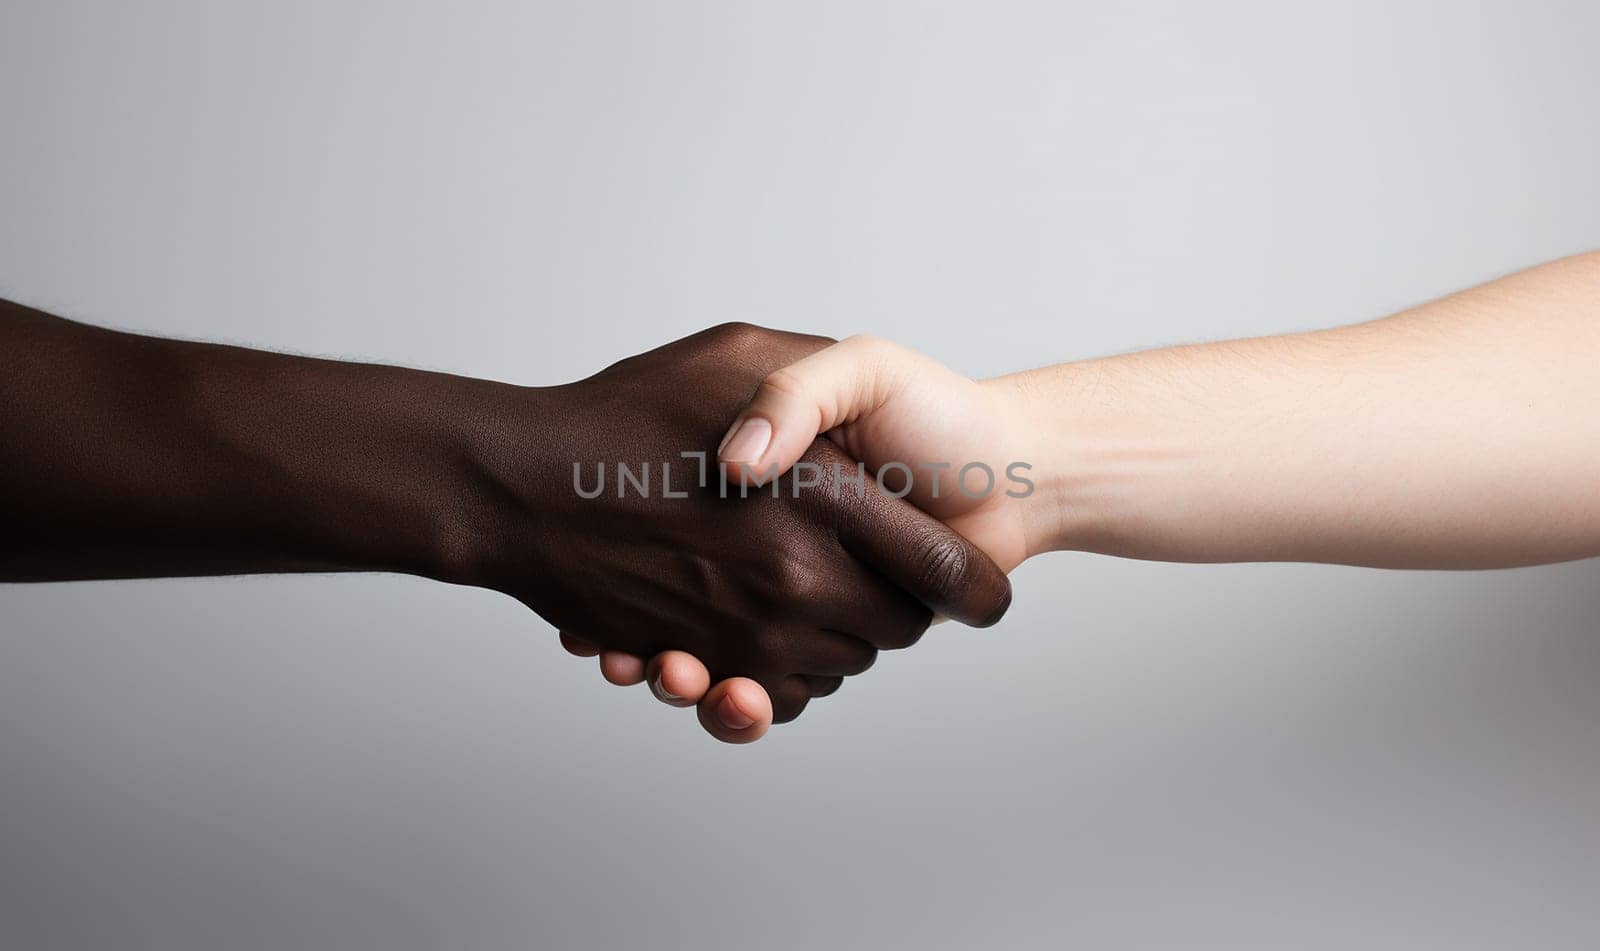 Black skinned and white skinned shaking hands.Handshake between African American man and Caucasian woman pose over gray background, greet each other, demonstrate international relationship. Close up shot. Shaking hands copy space by Annebel146